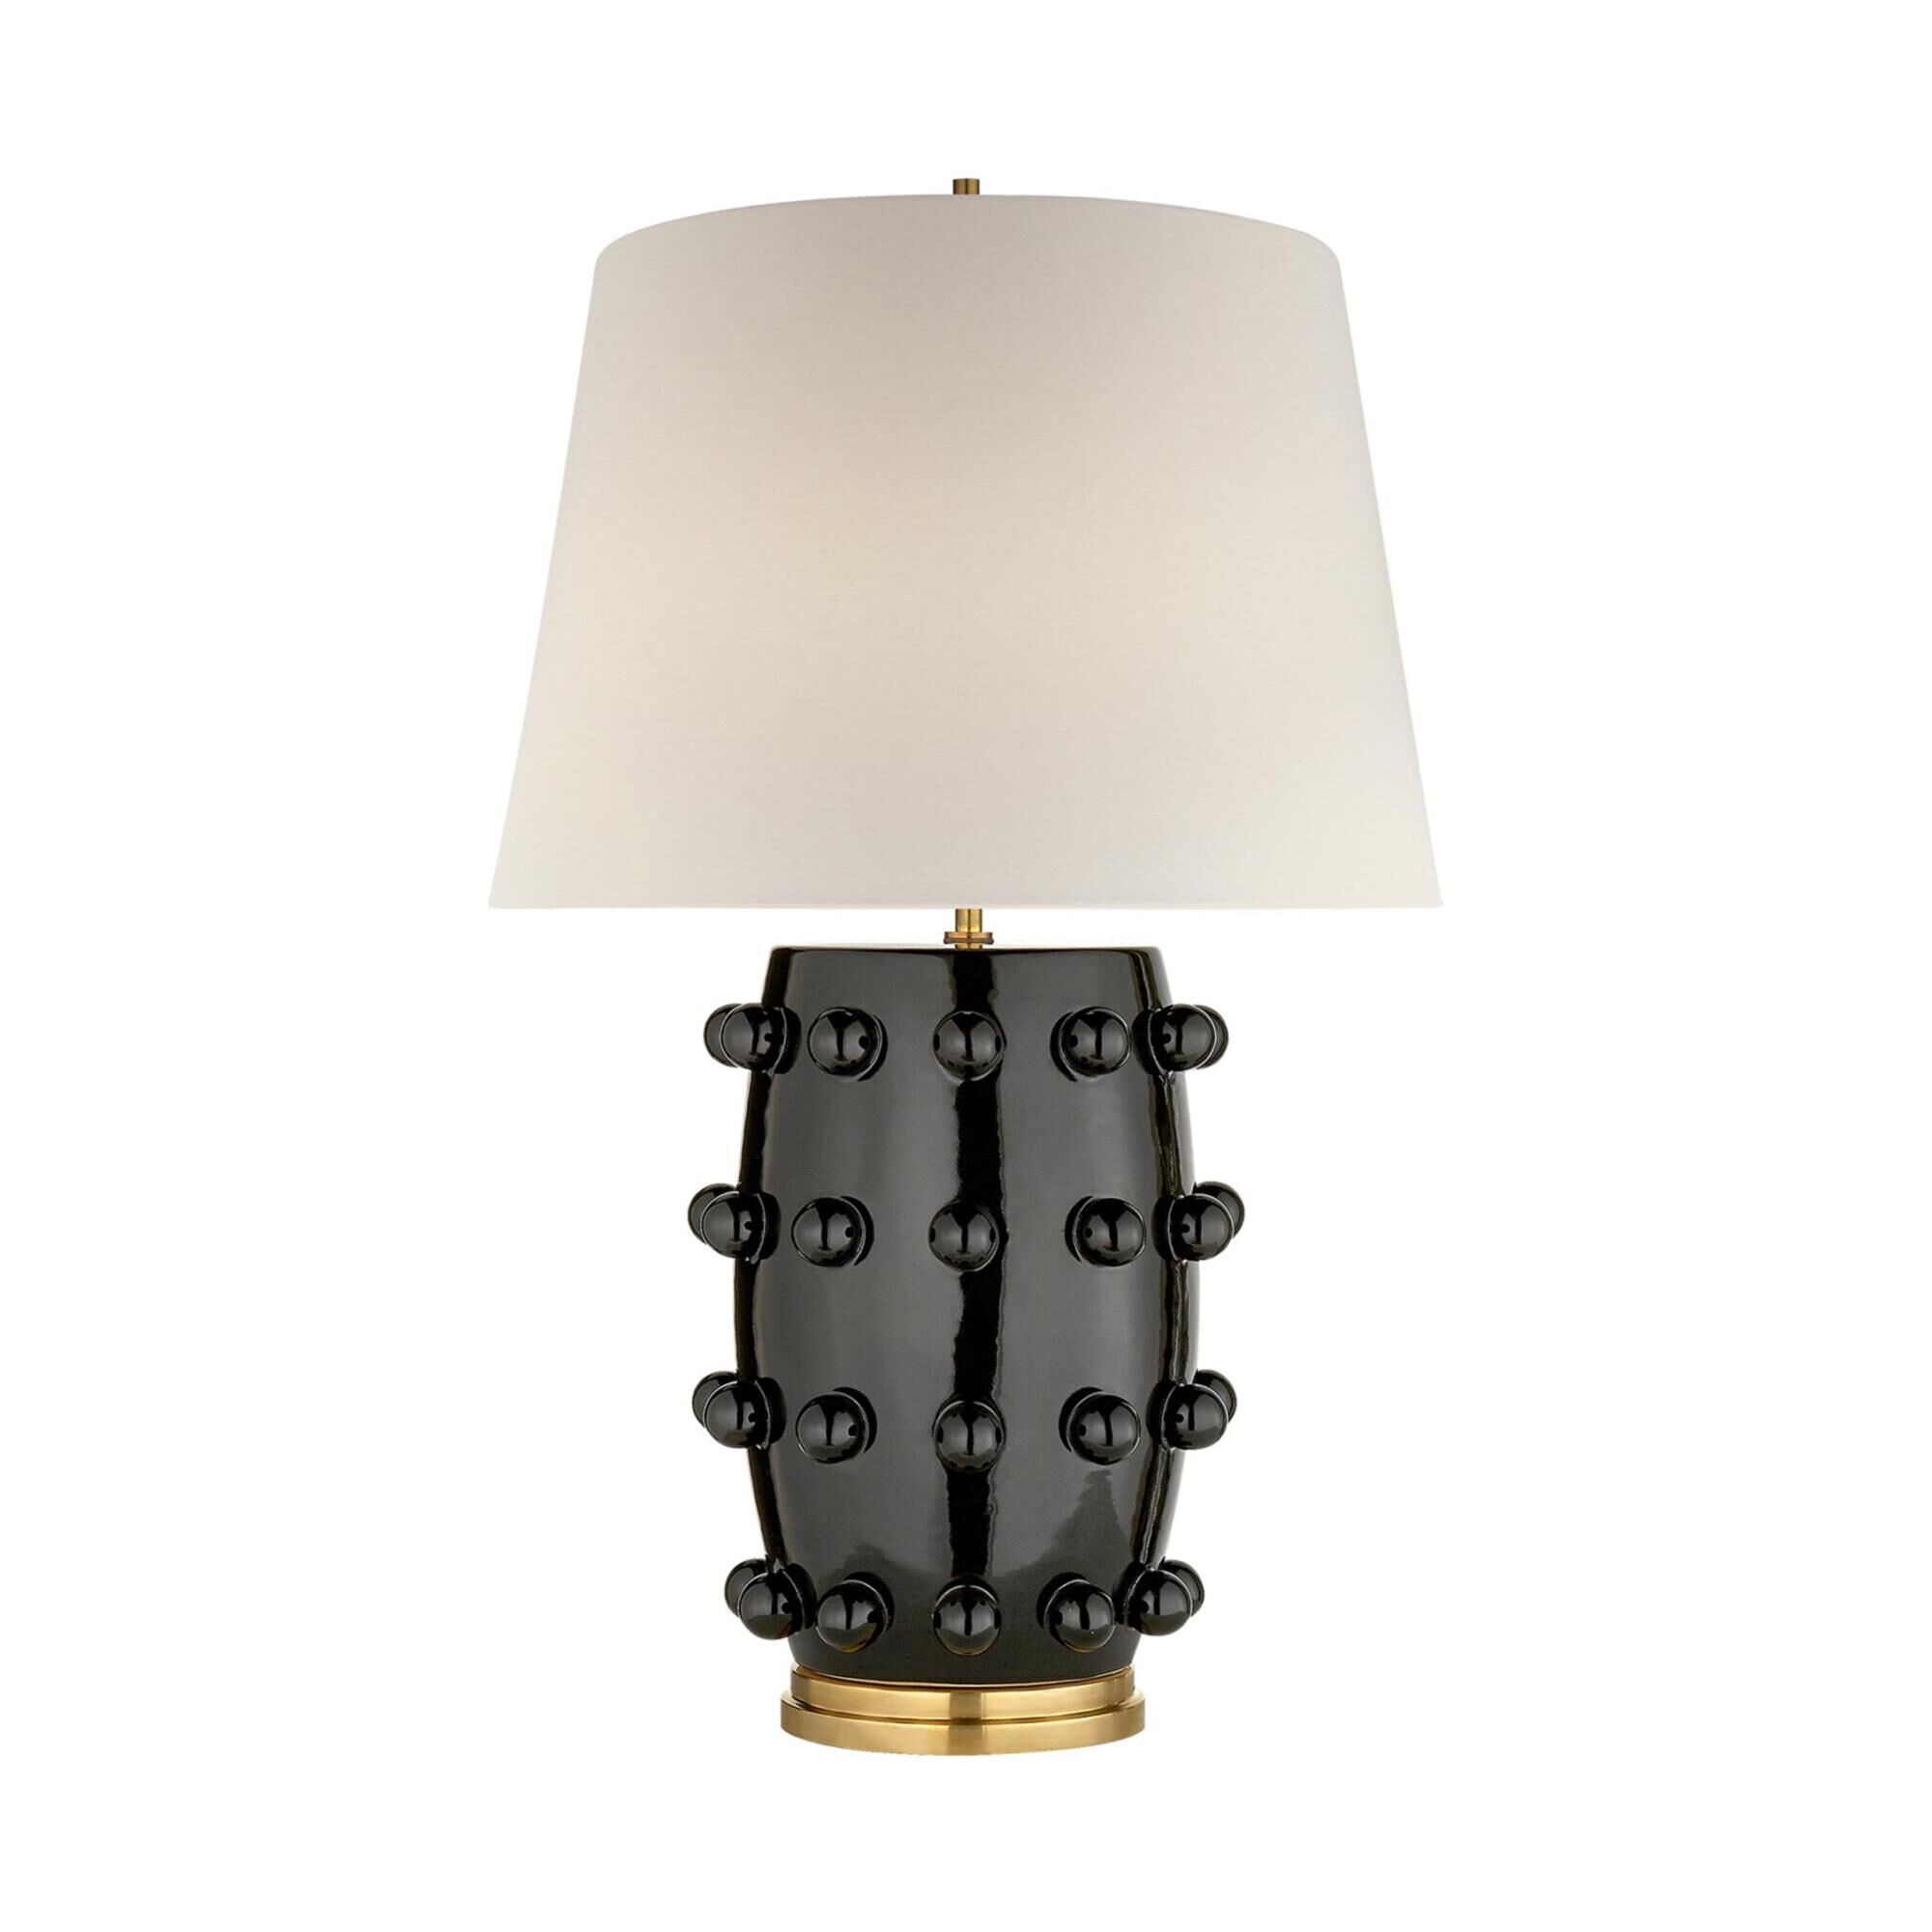 Kelly Wearstler Linden 26 Inch Table Lamp by Visual Comfort and Co. | Capitol Lighting 1800lighting.com